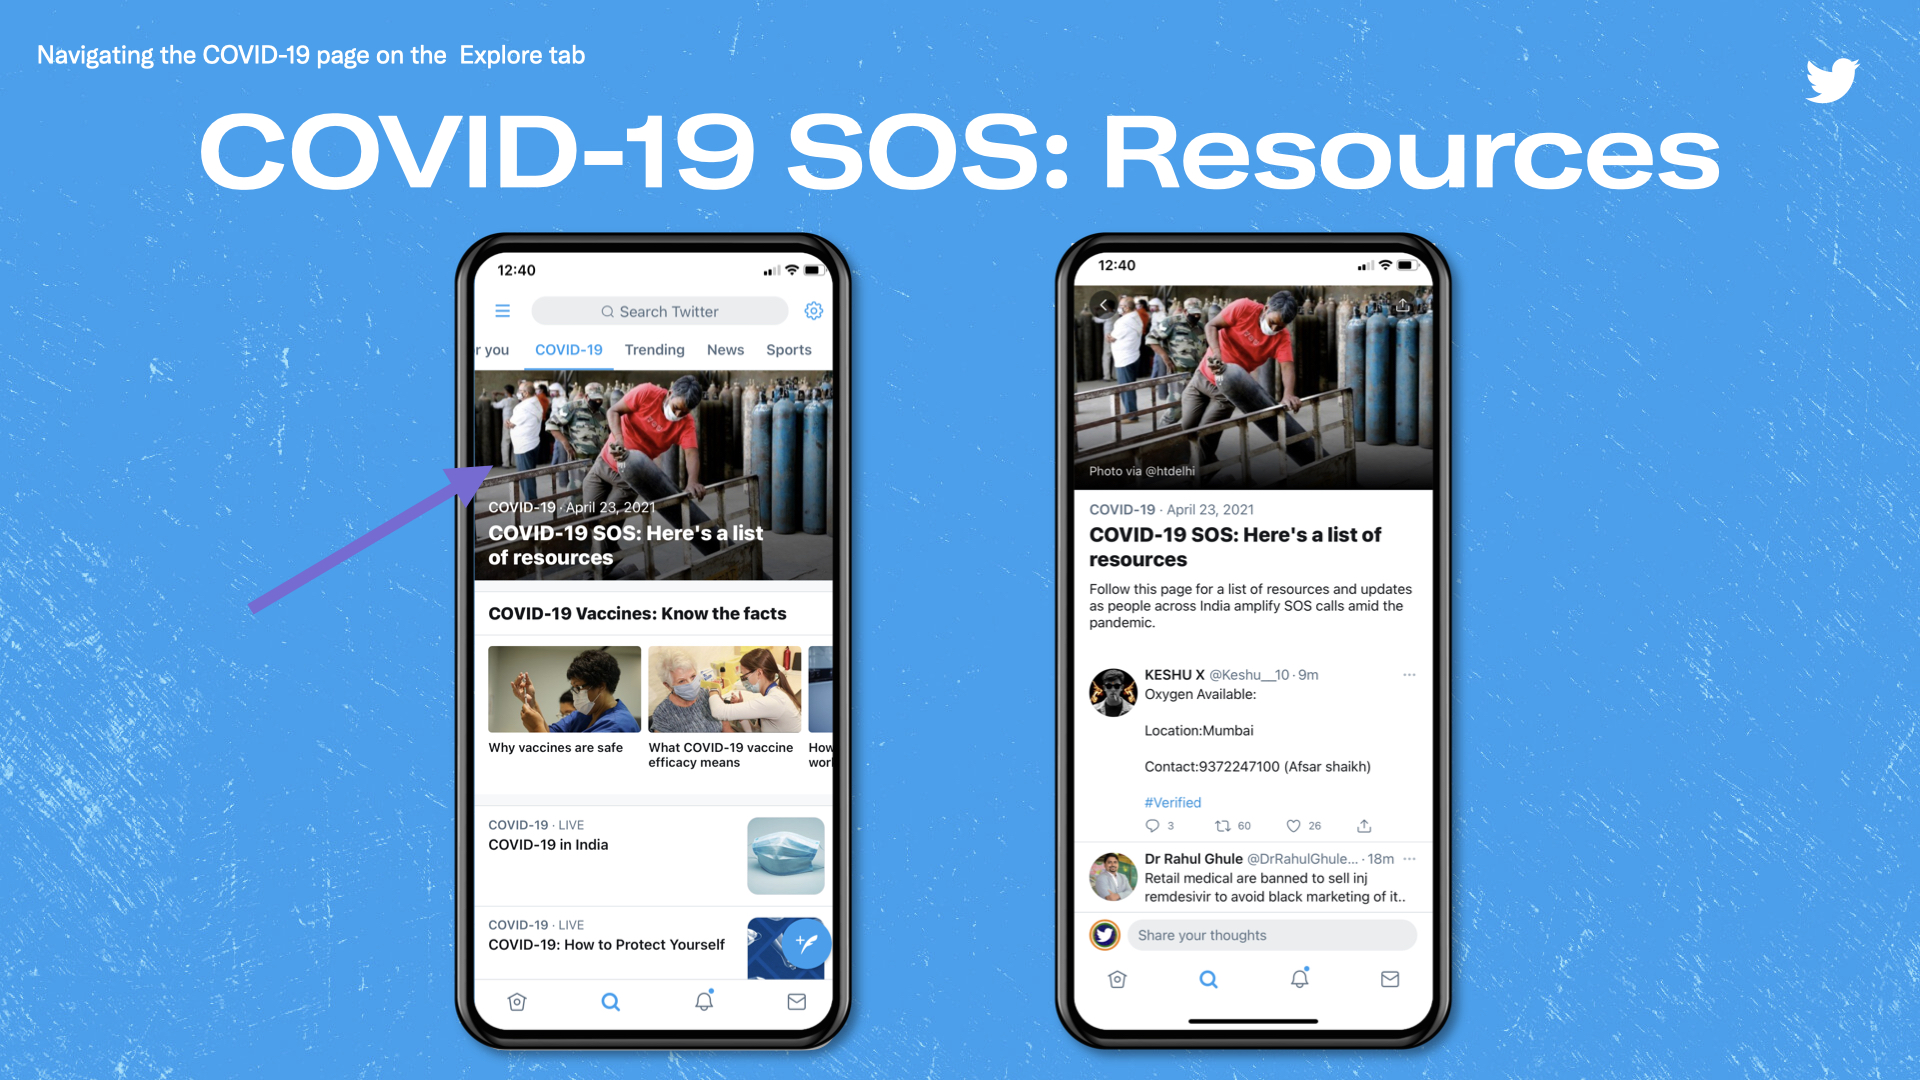 Twitter releases 'COVID-19 SOS: Resources' page to help people in India for resources amid the pandemic